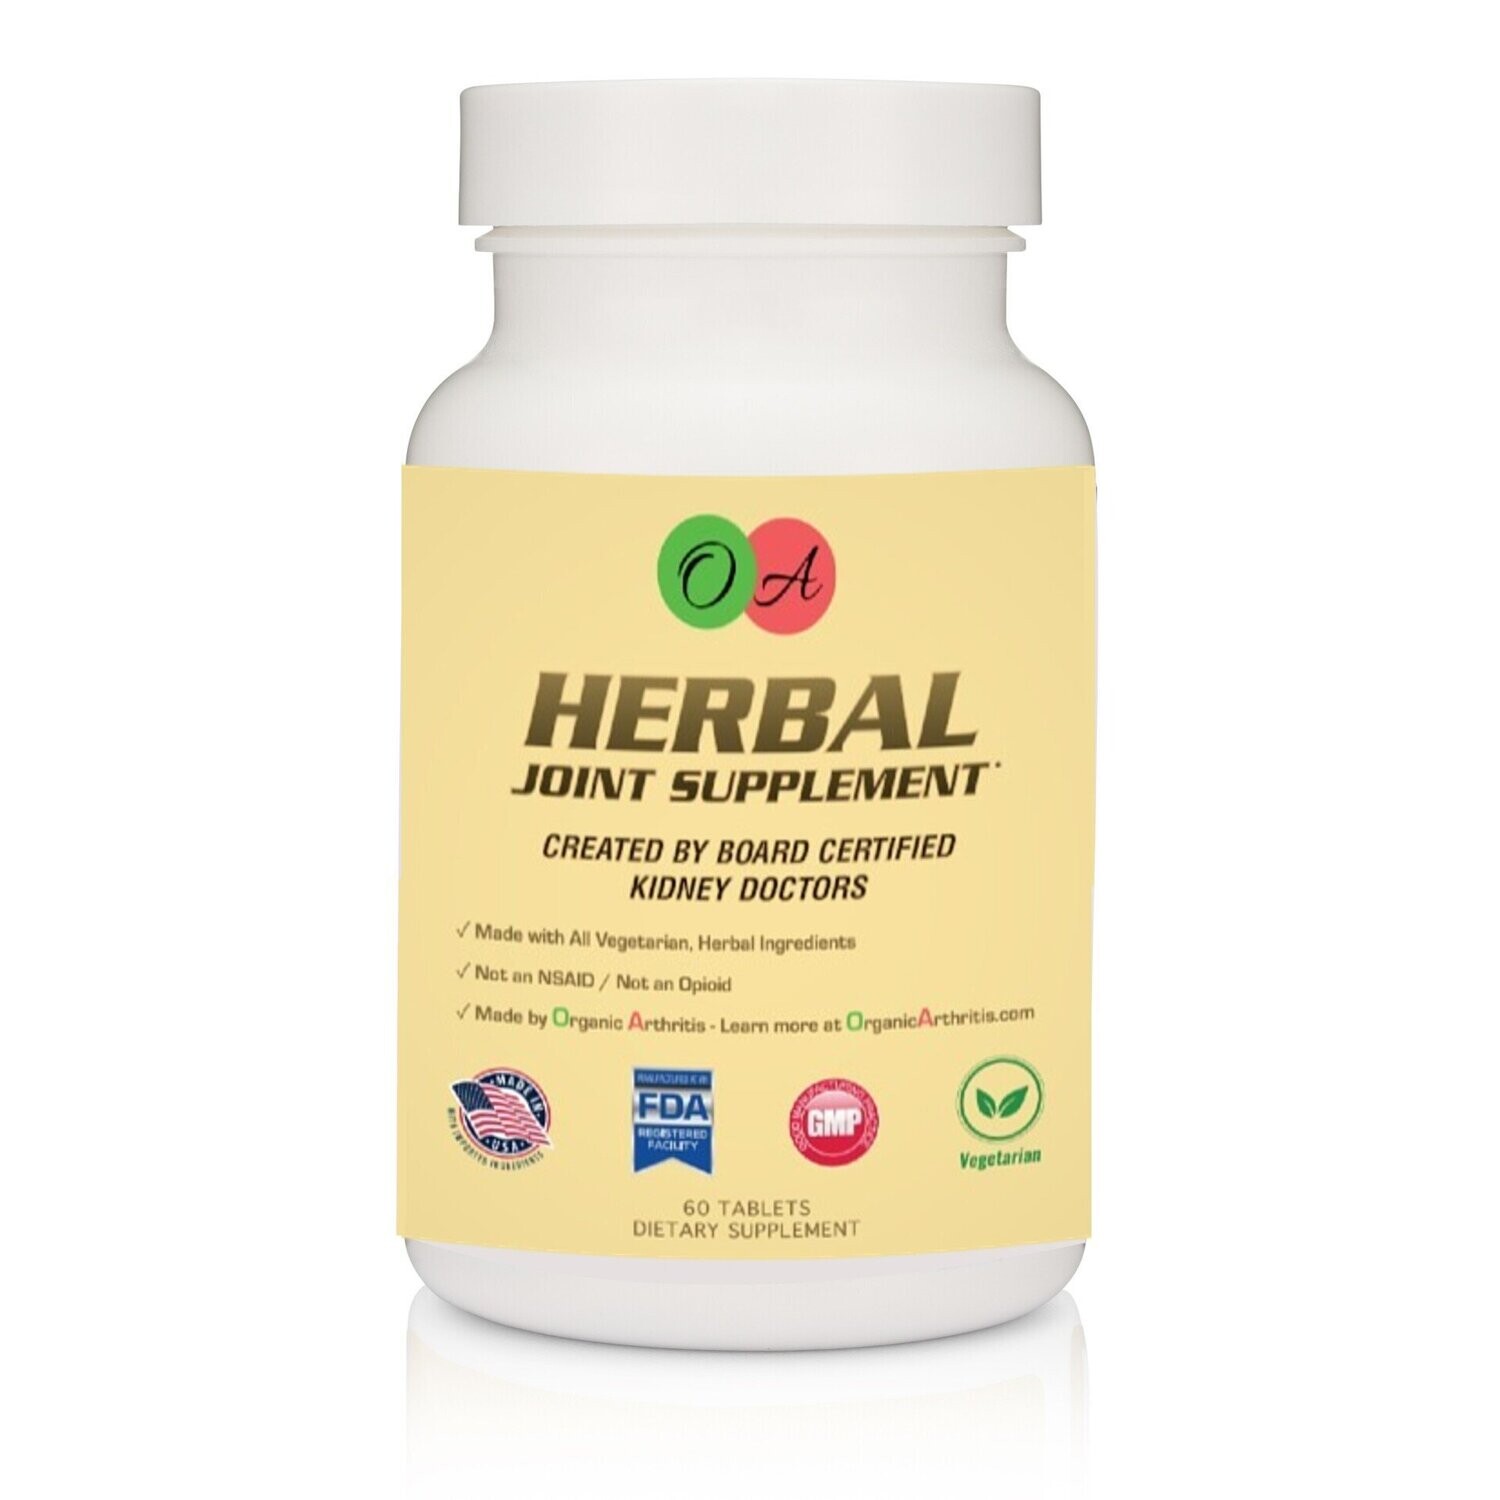 Herbal Joint Supplement - made by Organic Arthritis